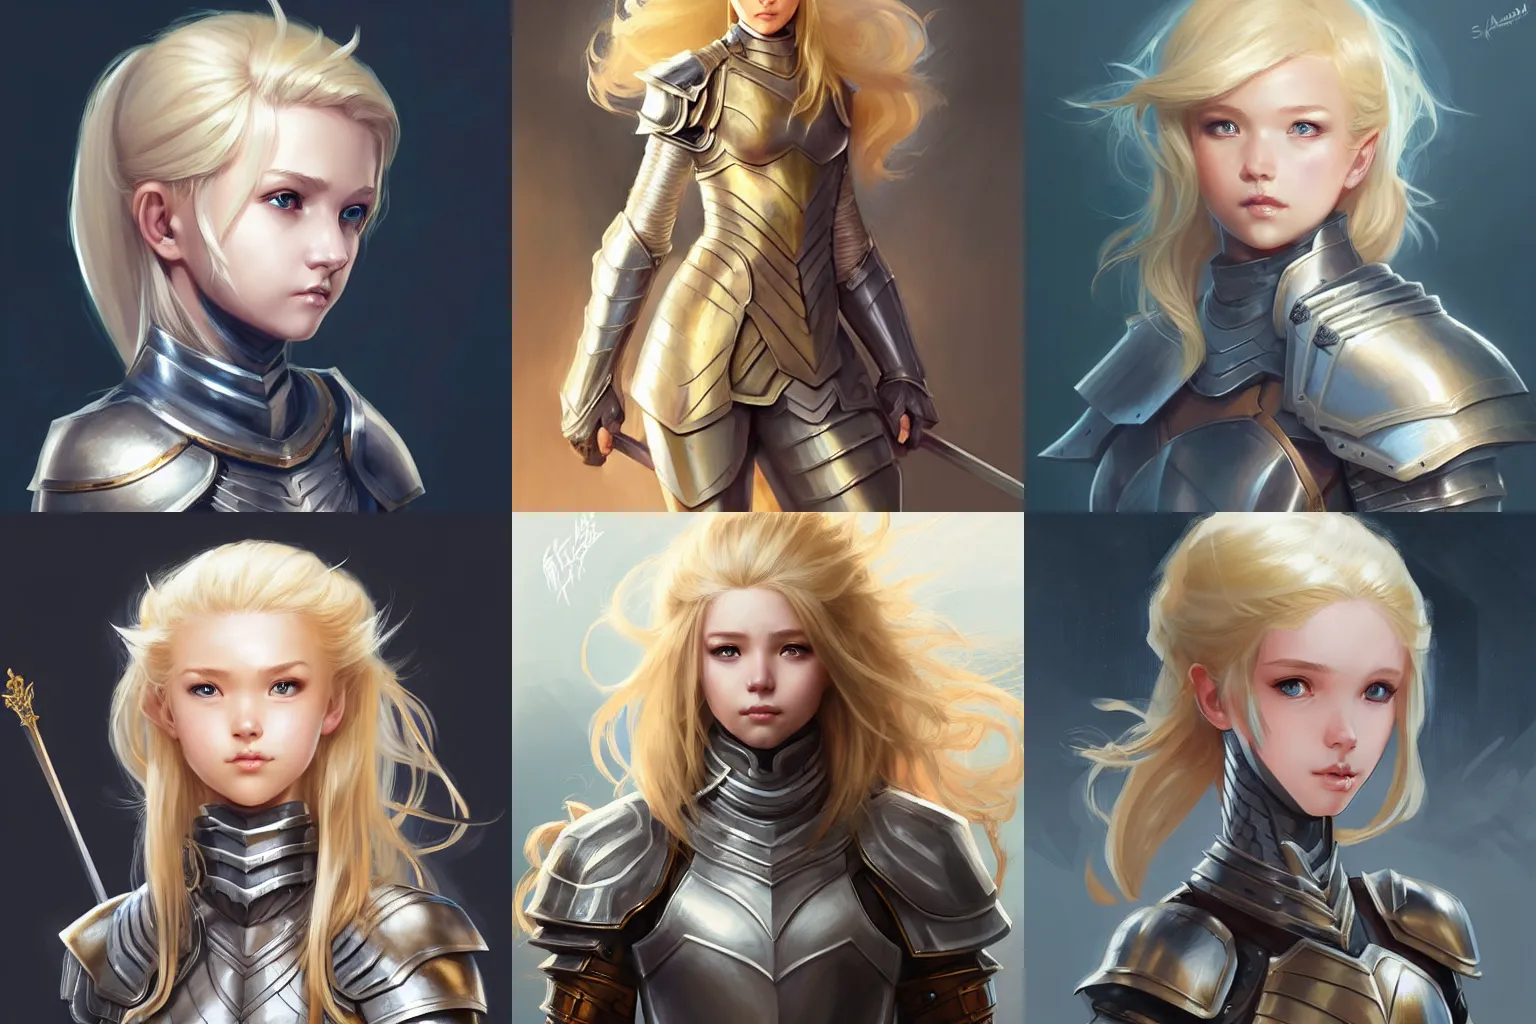 1. "Blonde Knight" by Kelly McCullough - wide 6